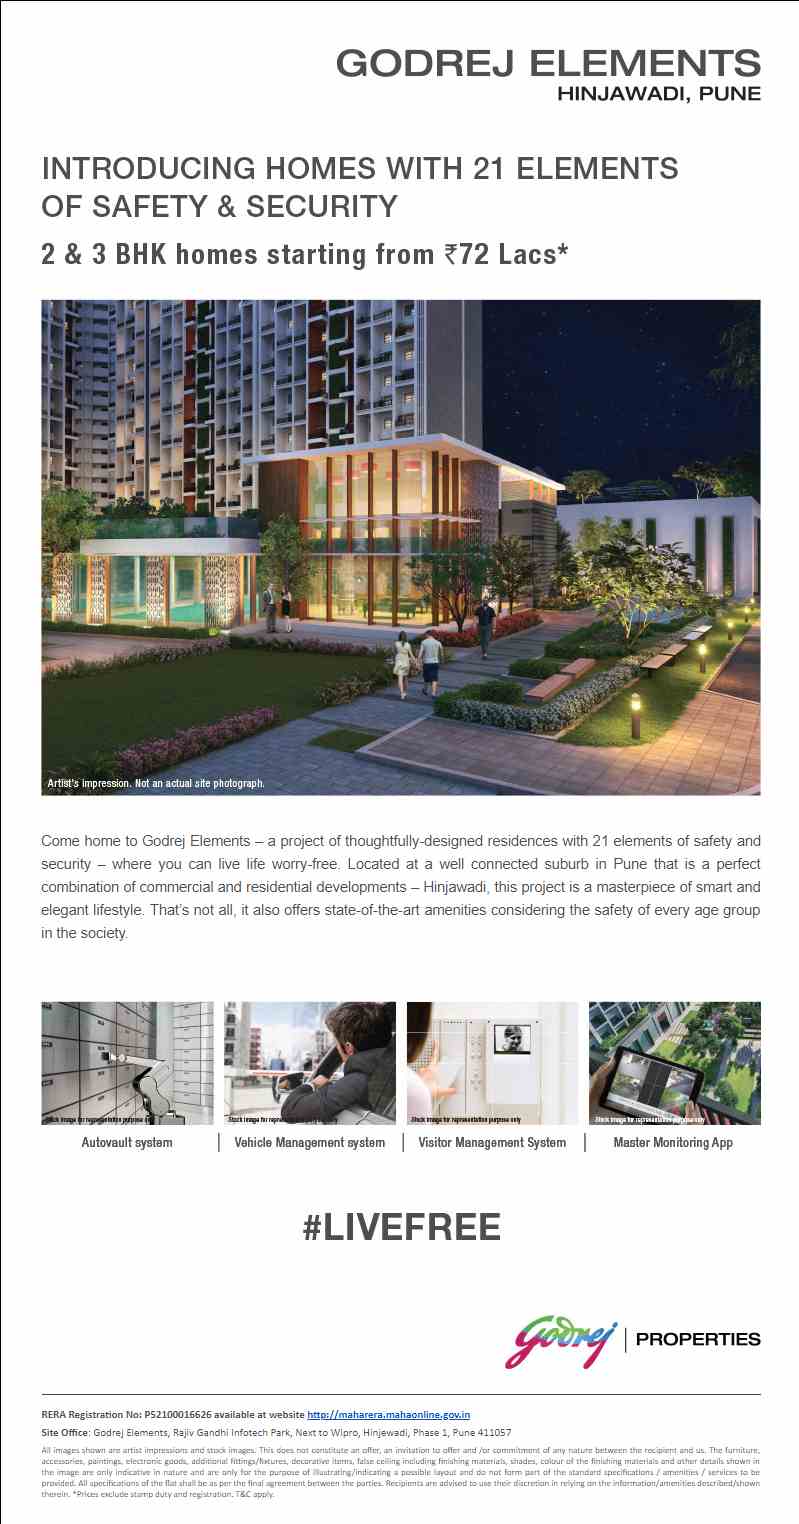 Live in home with 21 elements of safety & security at Godrej Elements in Pune Update